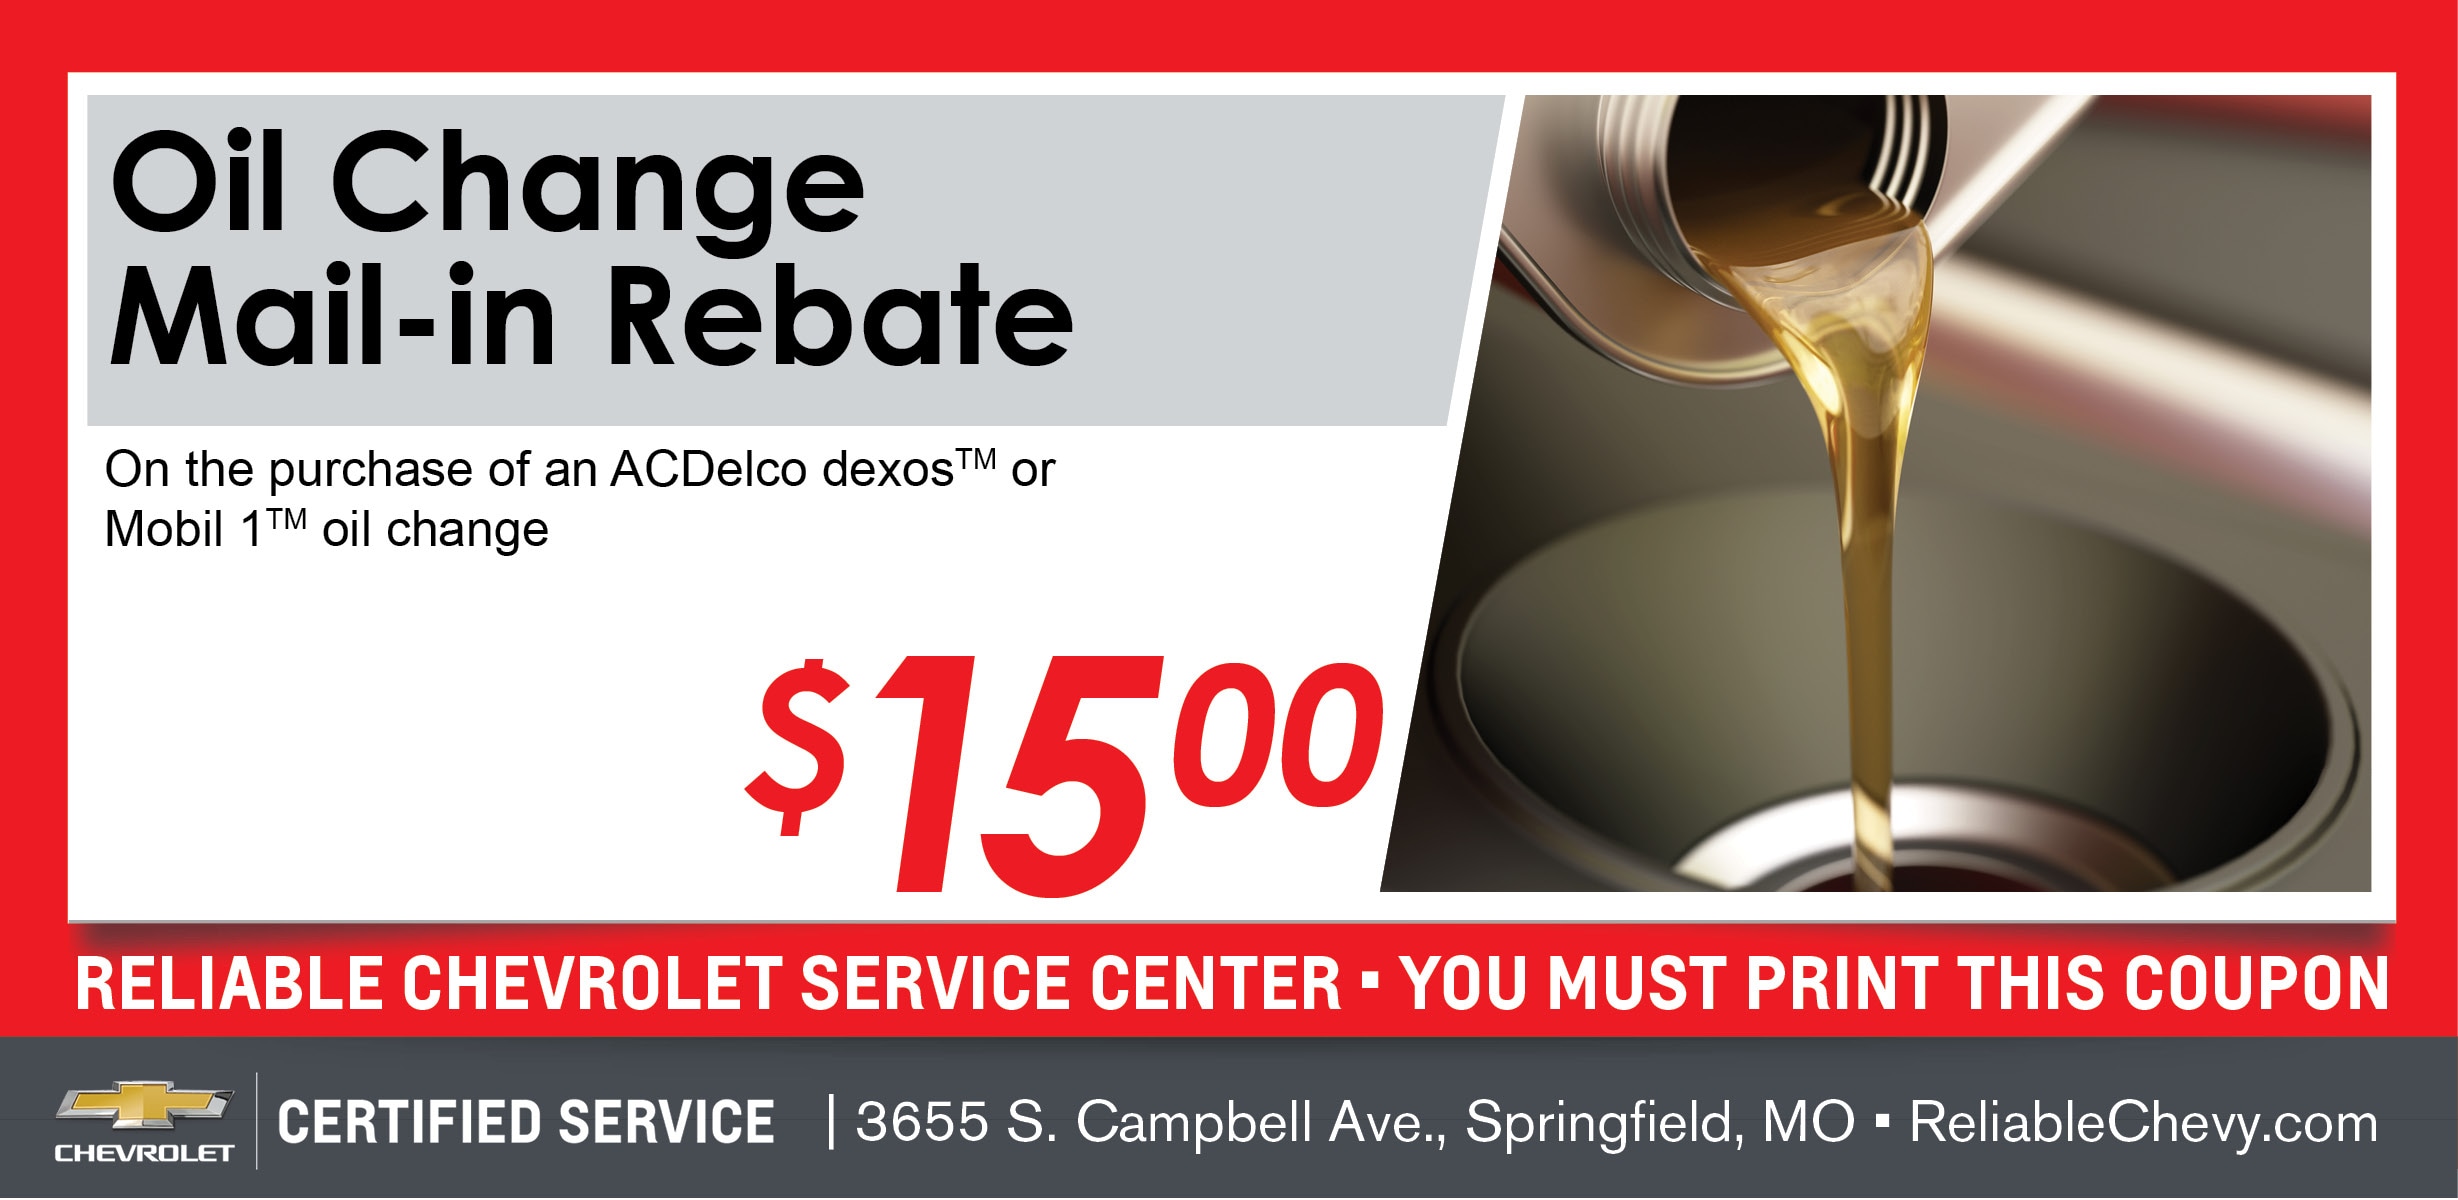 chevy-oil-change-car-service-special-reliable-chevrolet-dealership